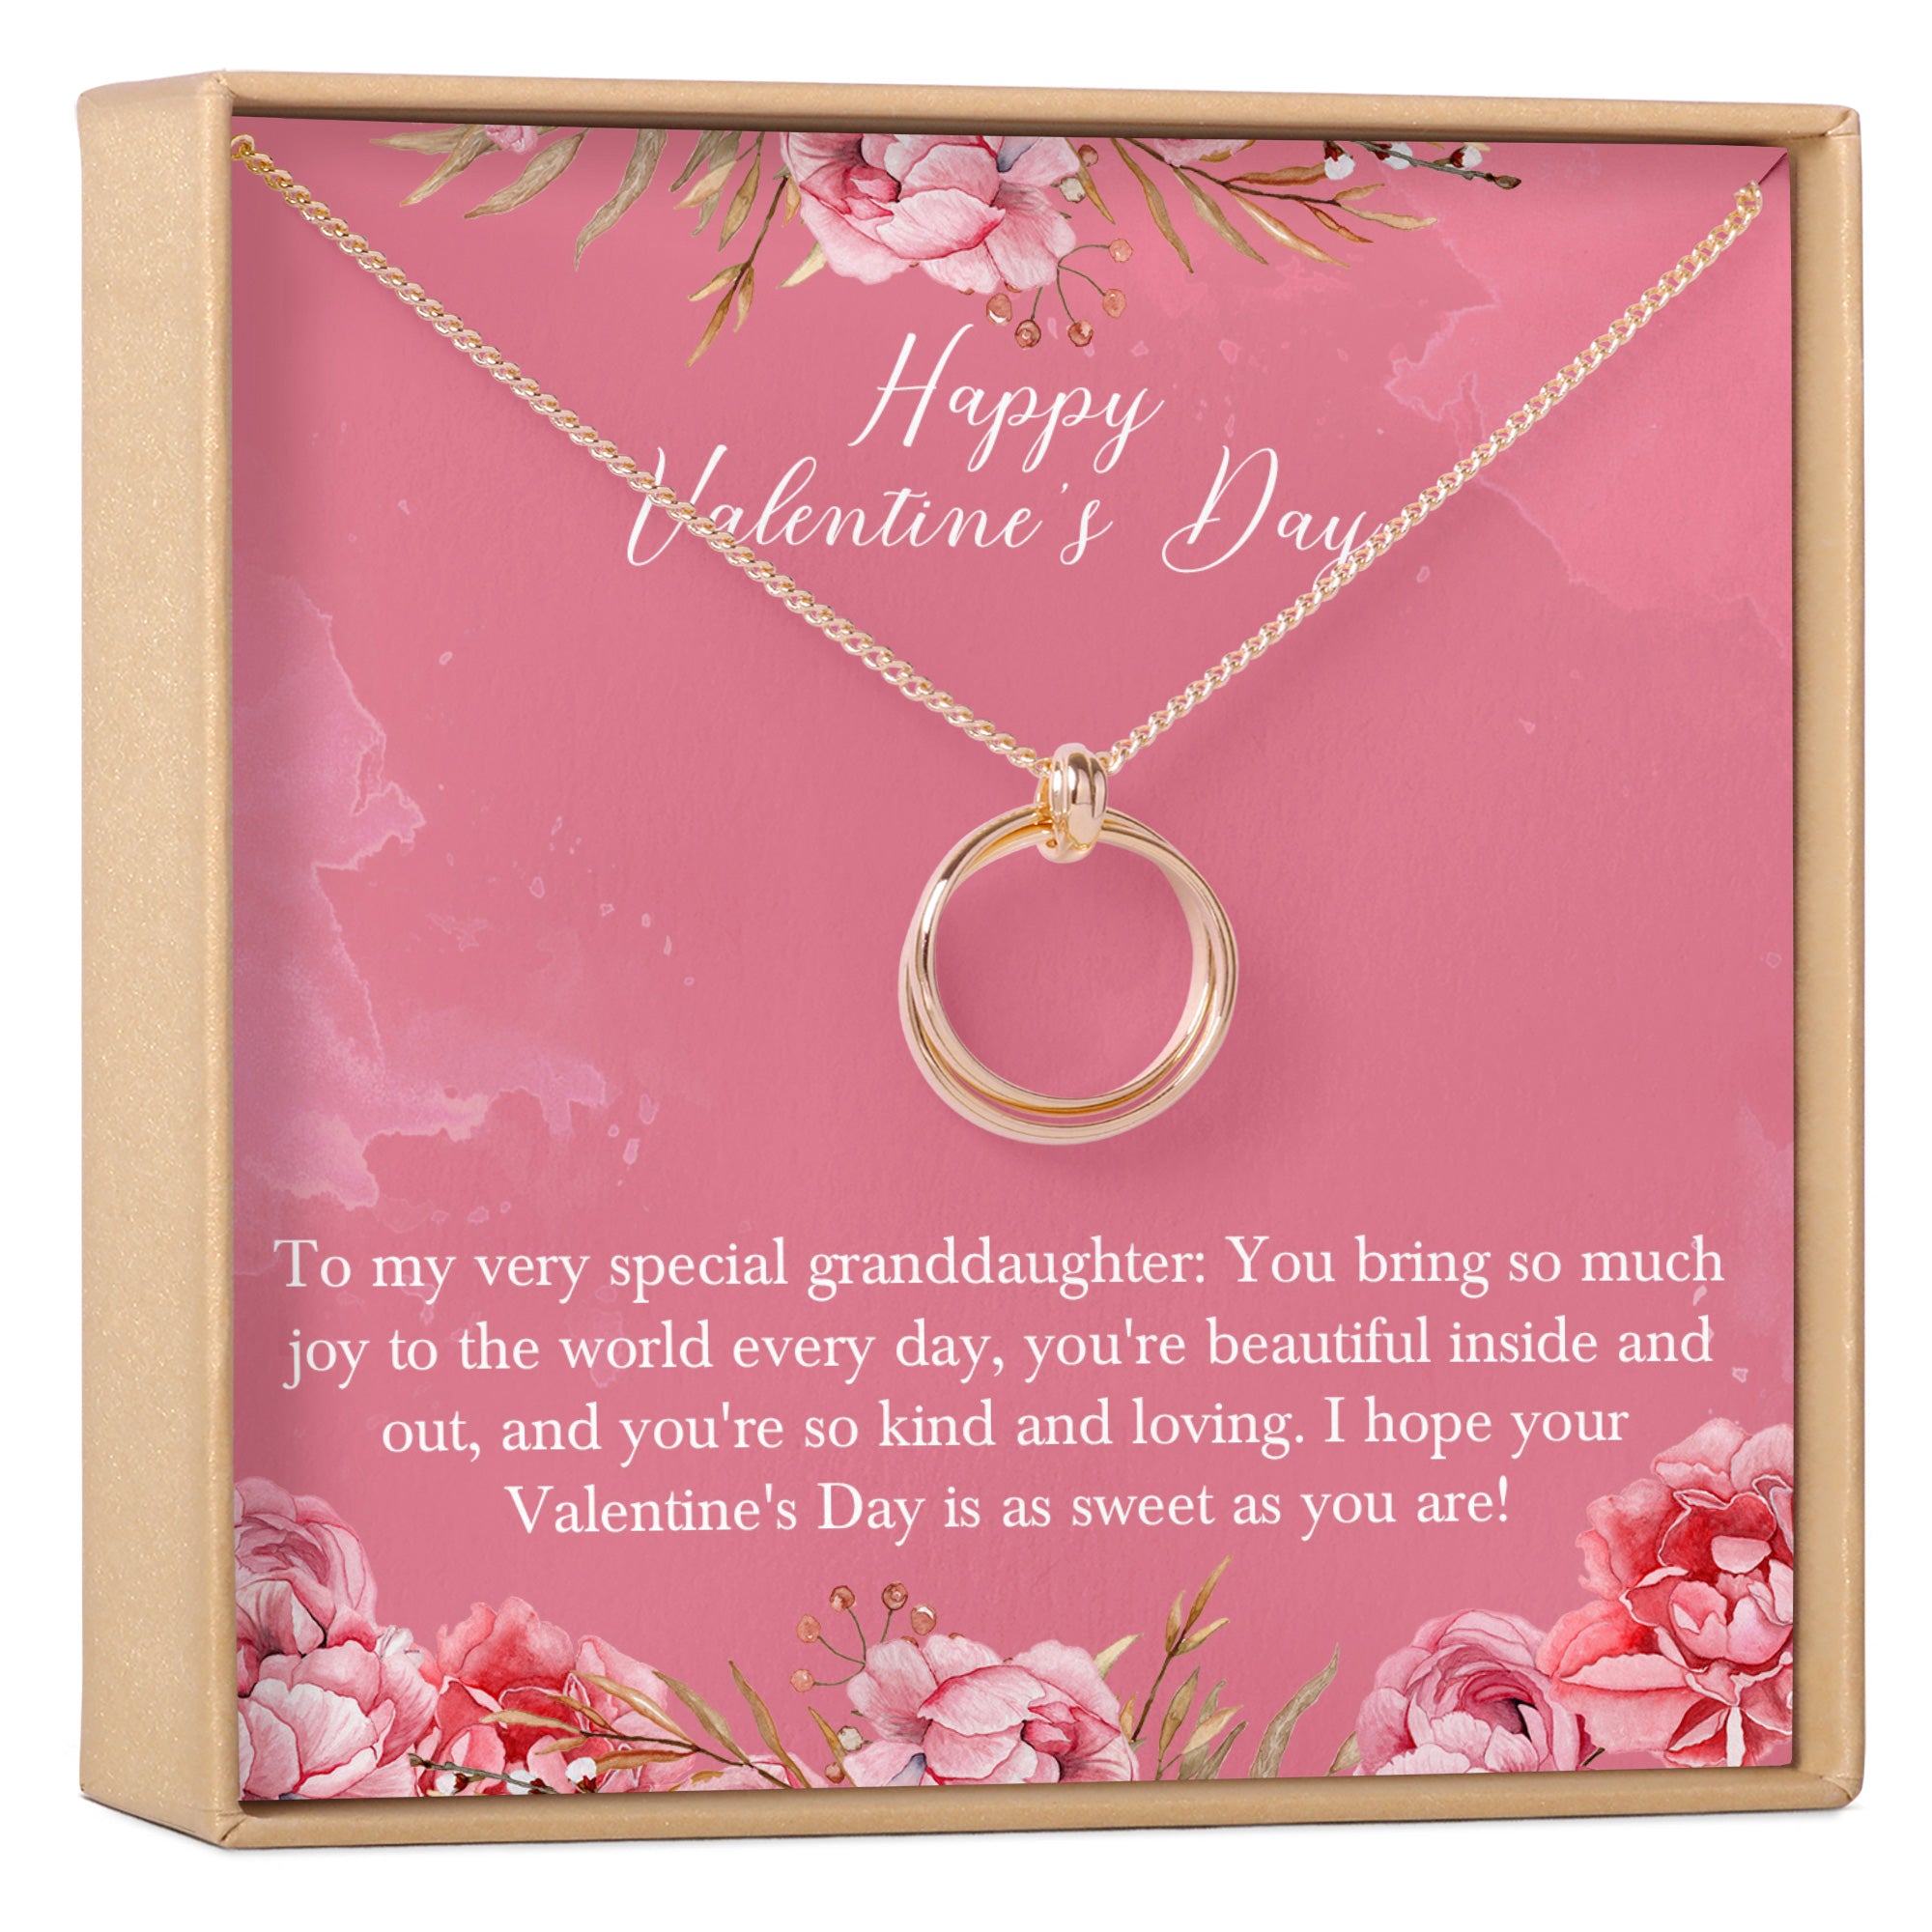 Valentine's Gifts for Her That She'll Treasure Forever